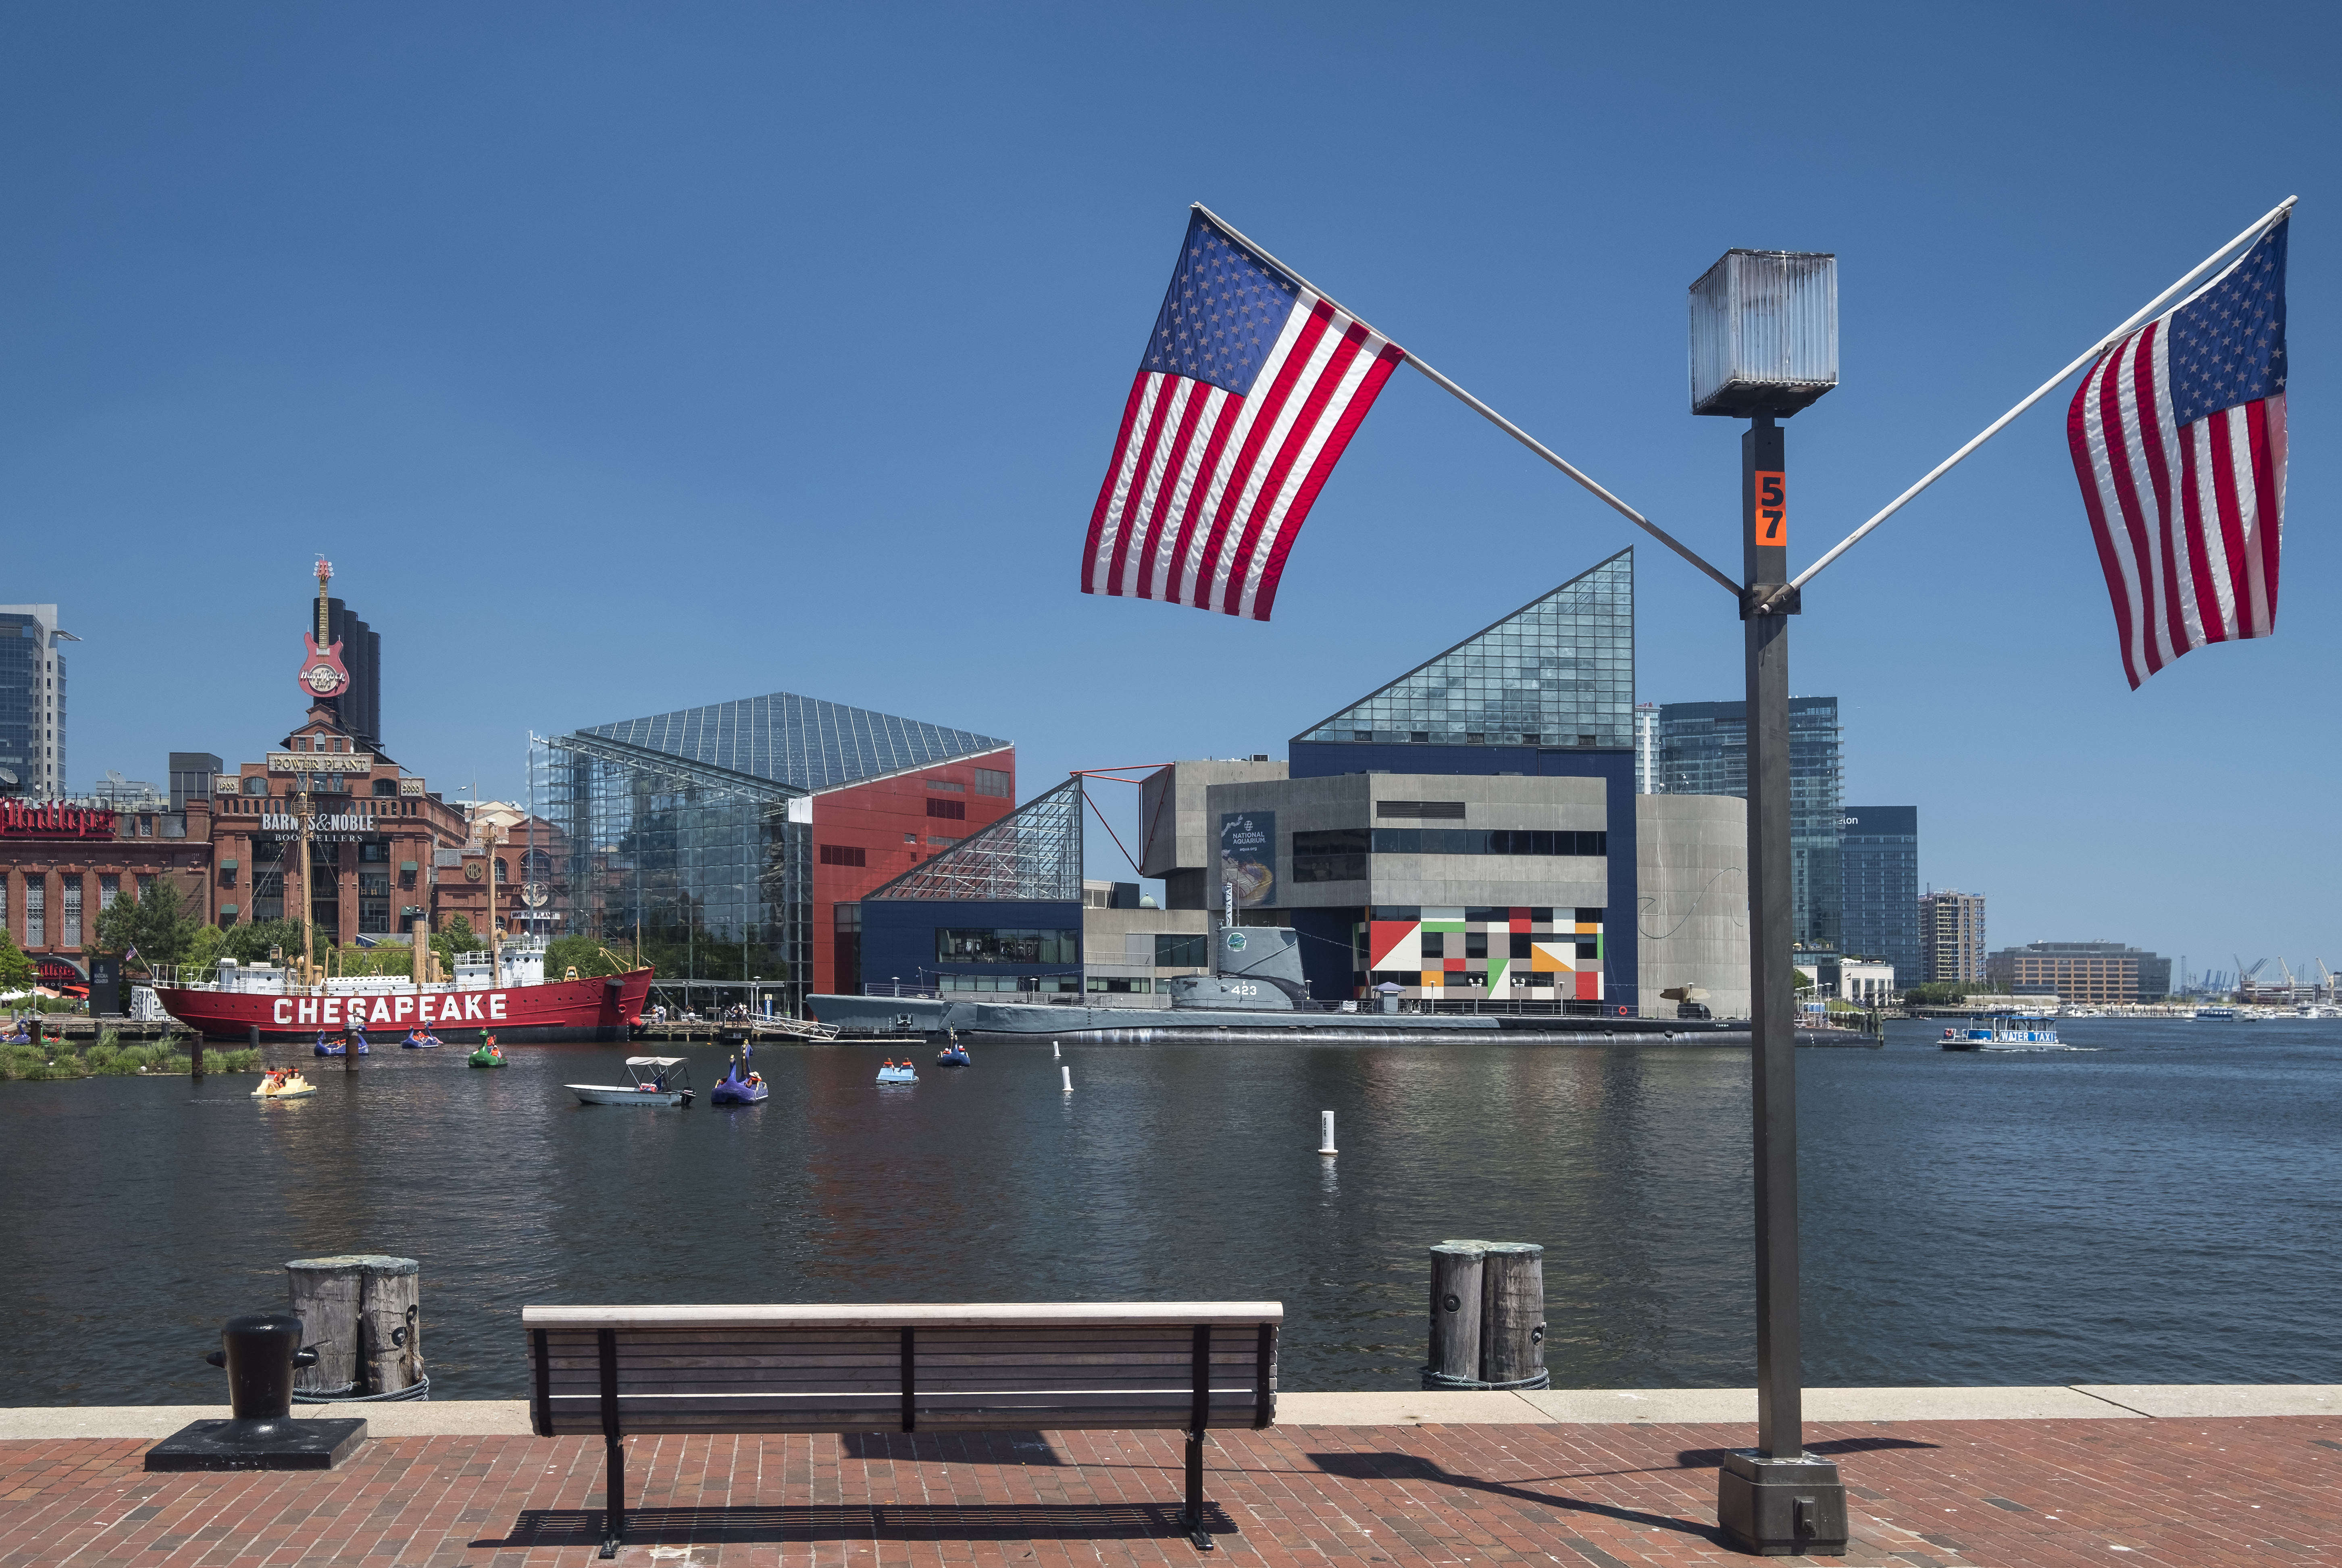 The Inner Harbour area in Baltimore